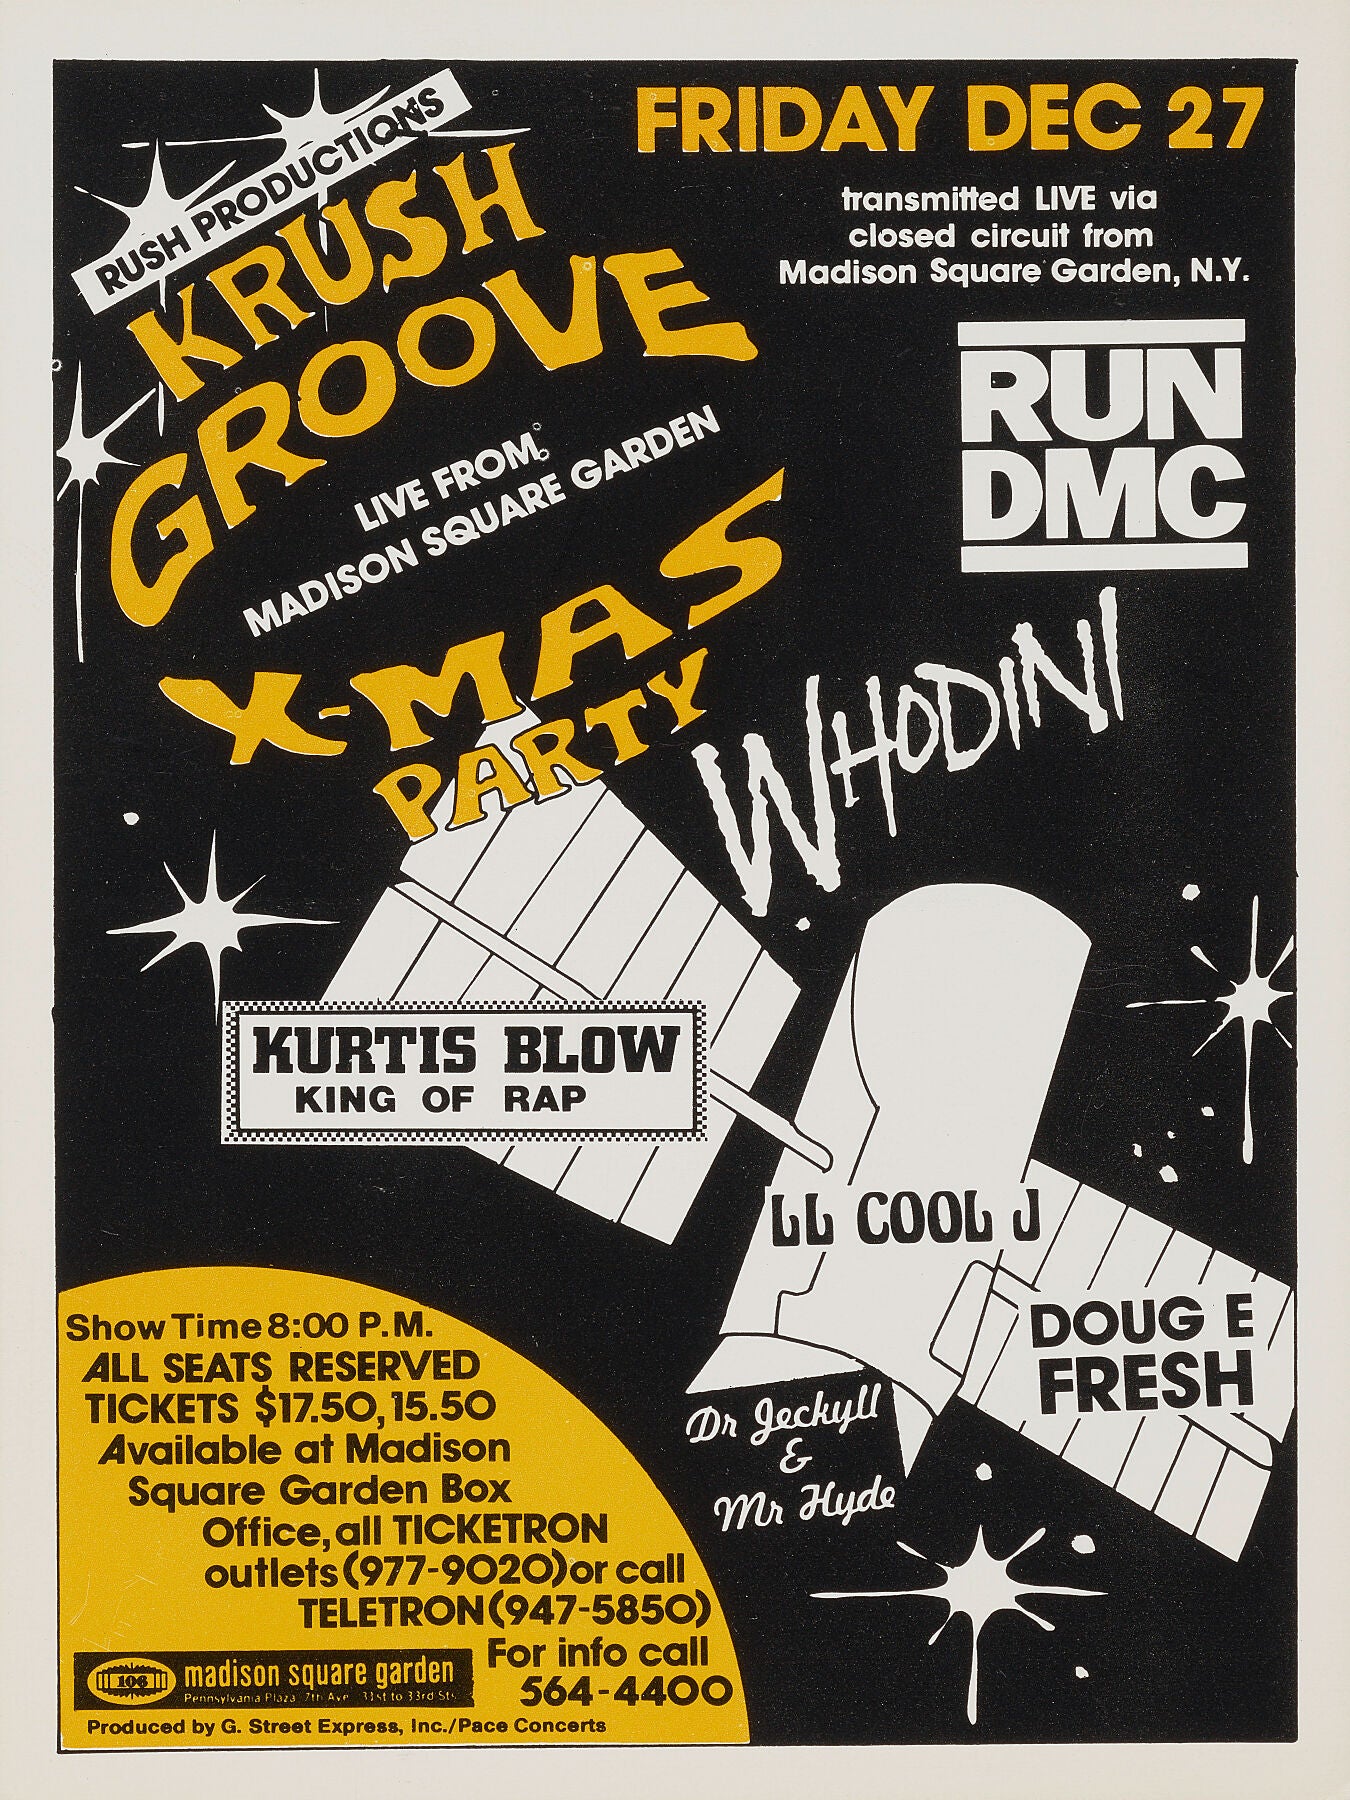 Handbill Flier for the Krush Groove Christmas Party Live from Madison Square Garden - 1985